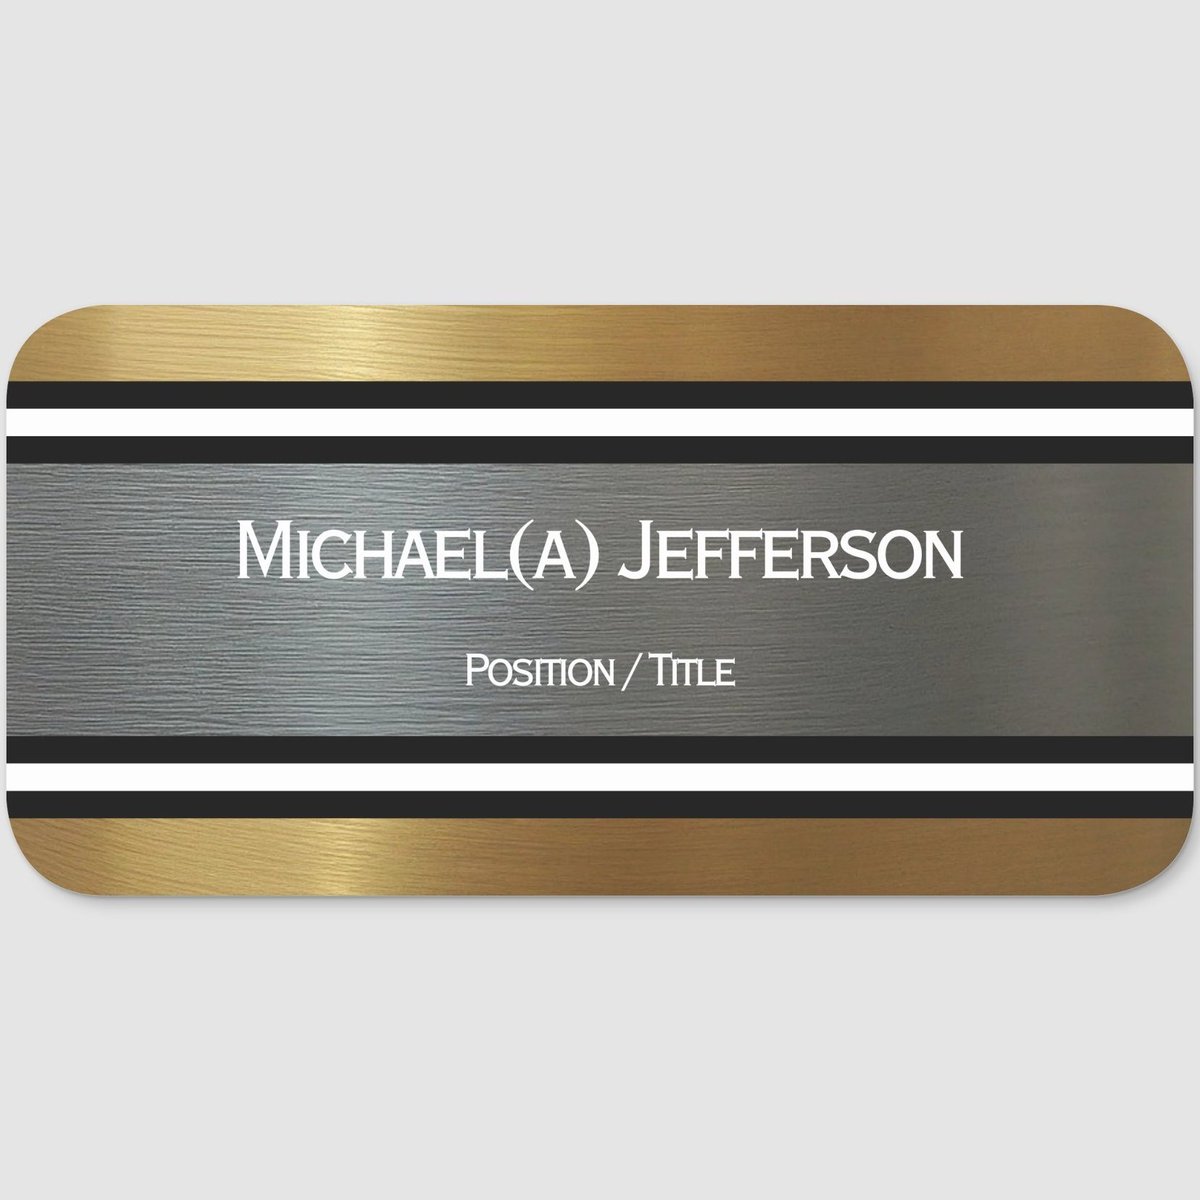 This unique design unites modern vibrancy with urban elegance zazzle.com/luxury_silver_… Silver & Gold #nametag can be a #Personalizedgift for #corporate #employees #Professional #identity for every team #nametags Give a #corporategift #zazzlemade #zazzle #BusinessMan #businesstips